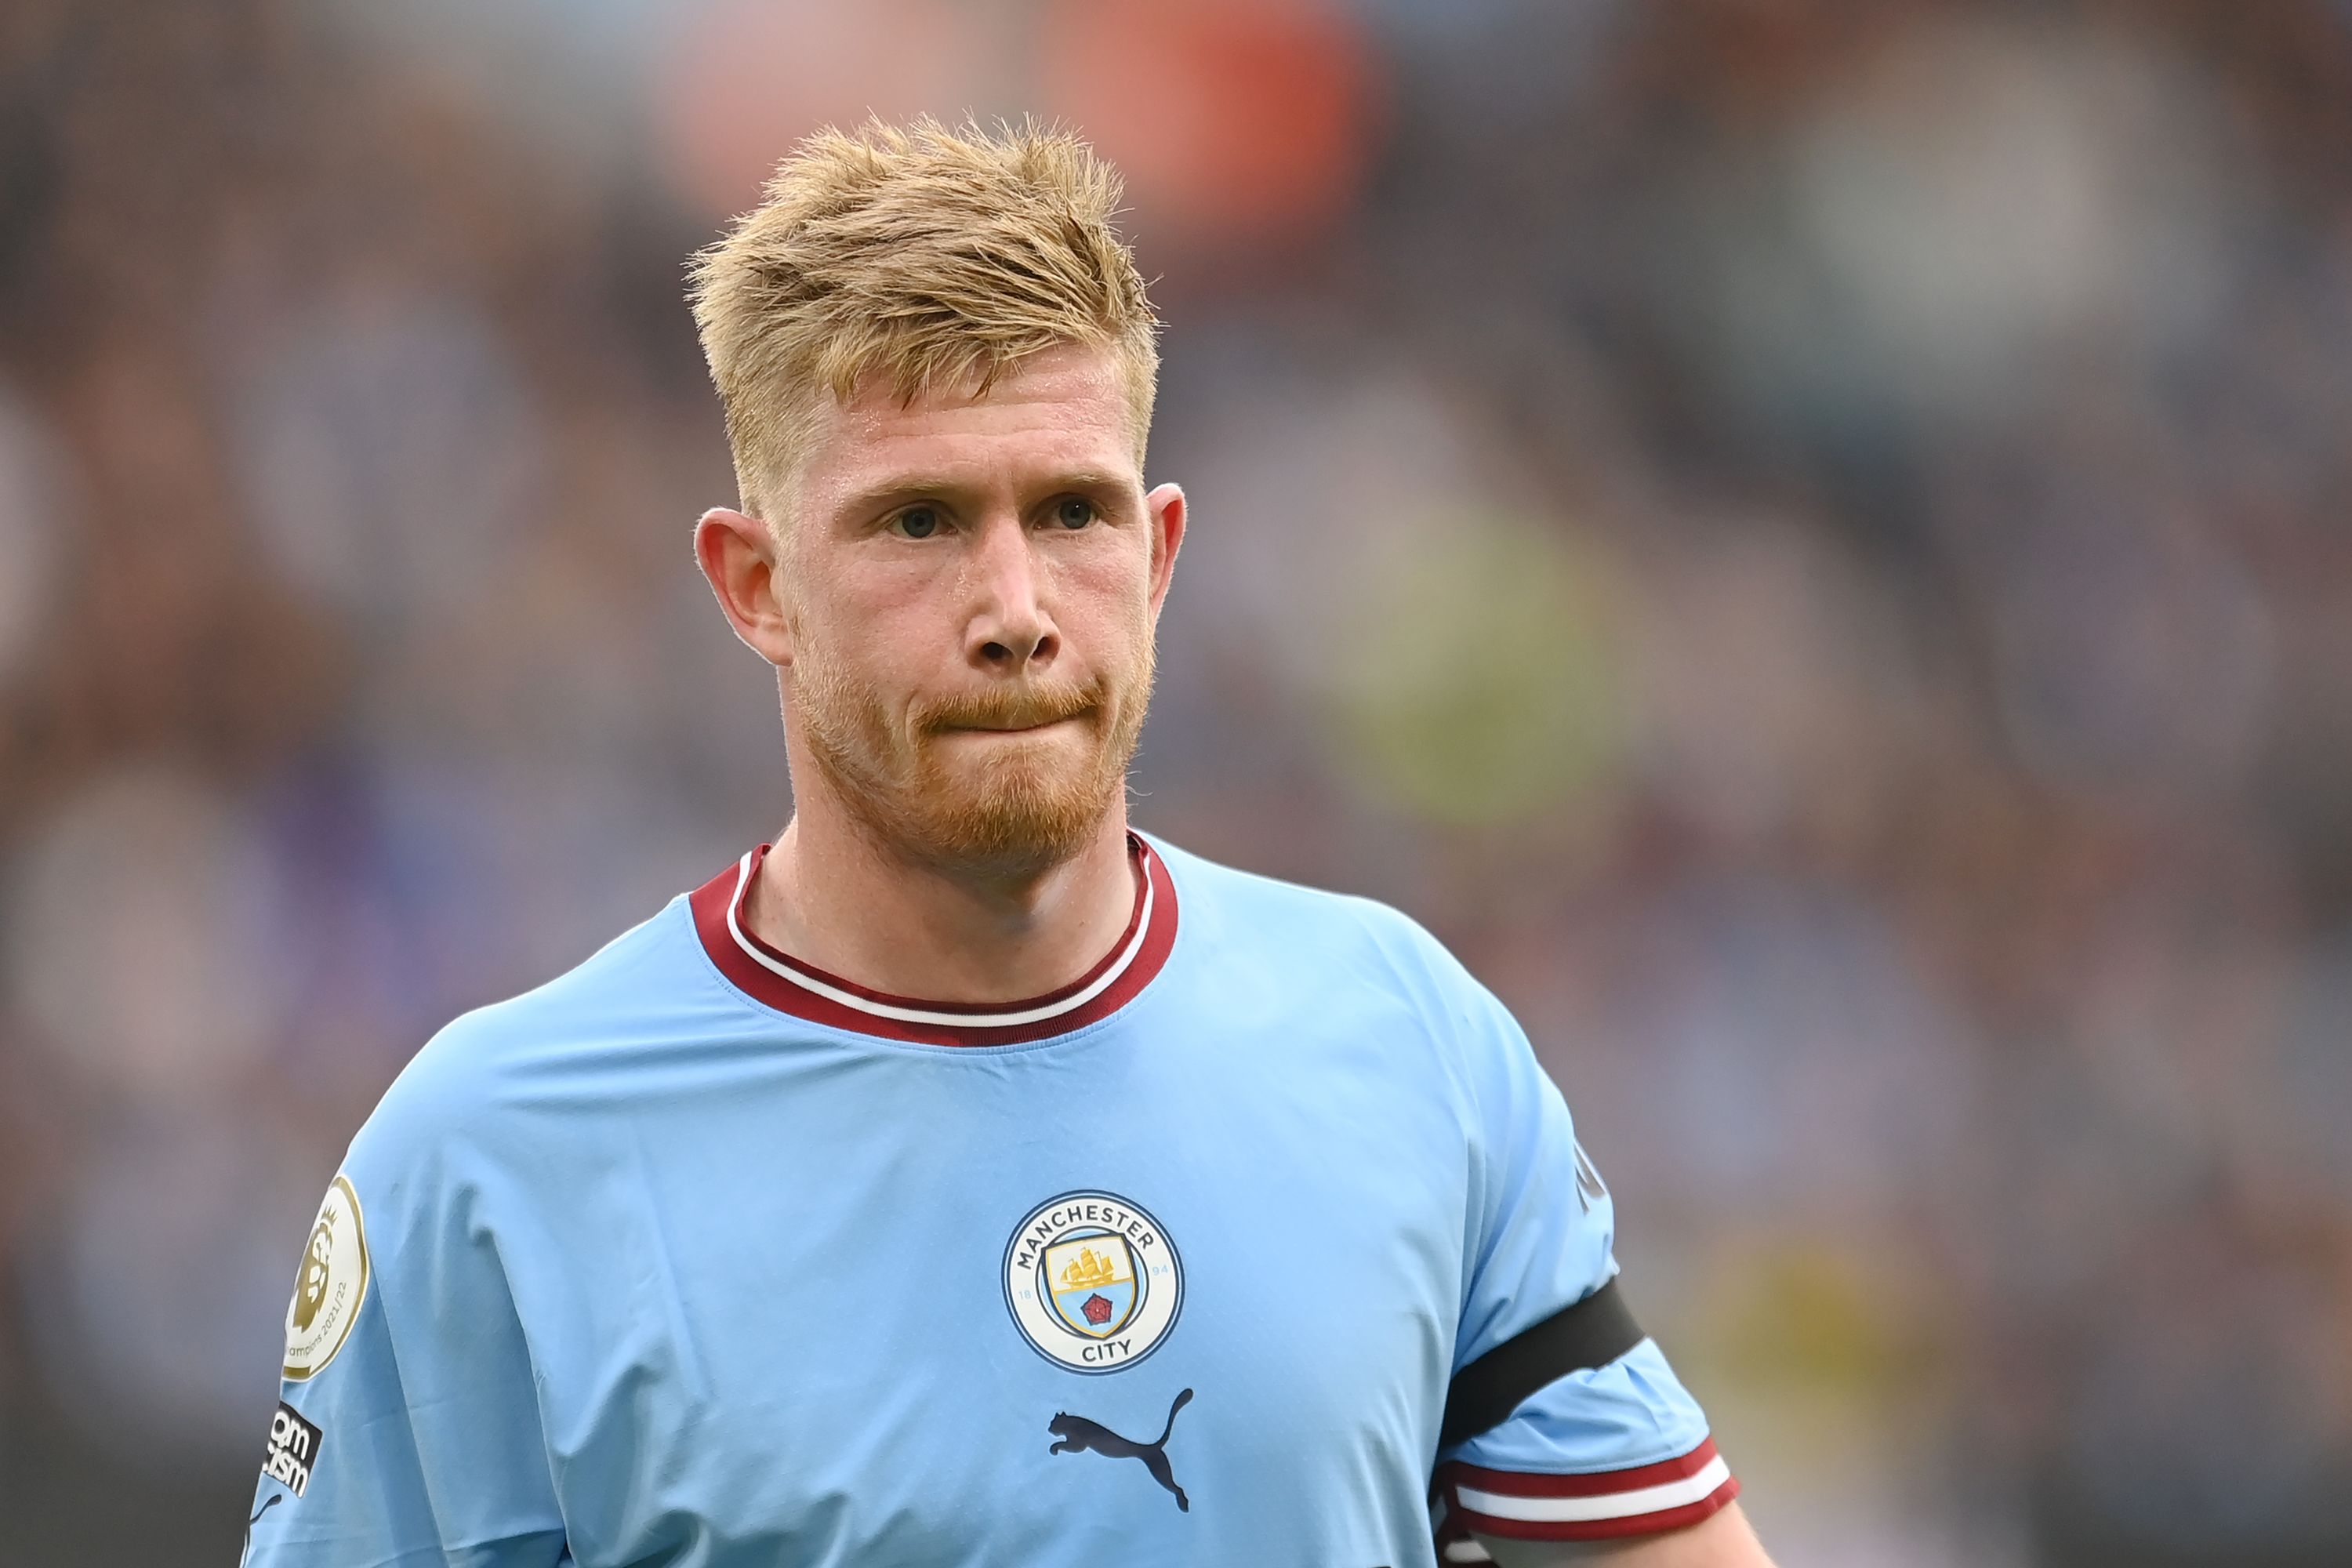 Kevin De Bruyne’s reaction to being gifted Man Utd shirt with his name on